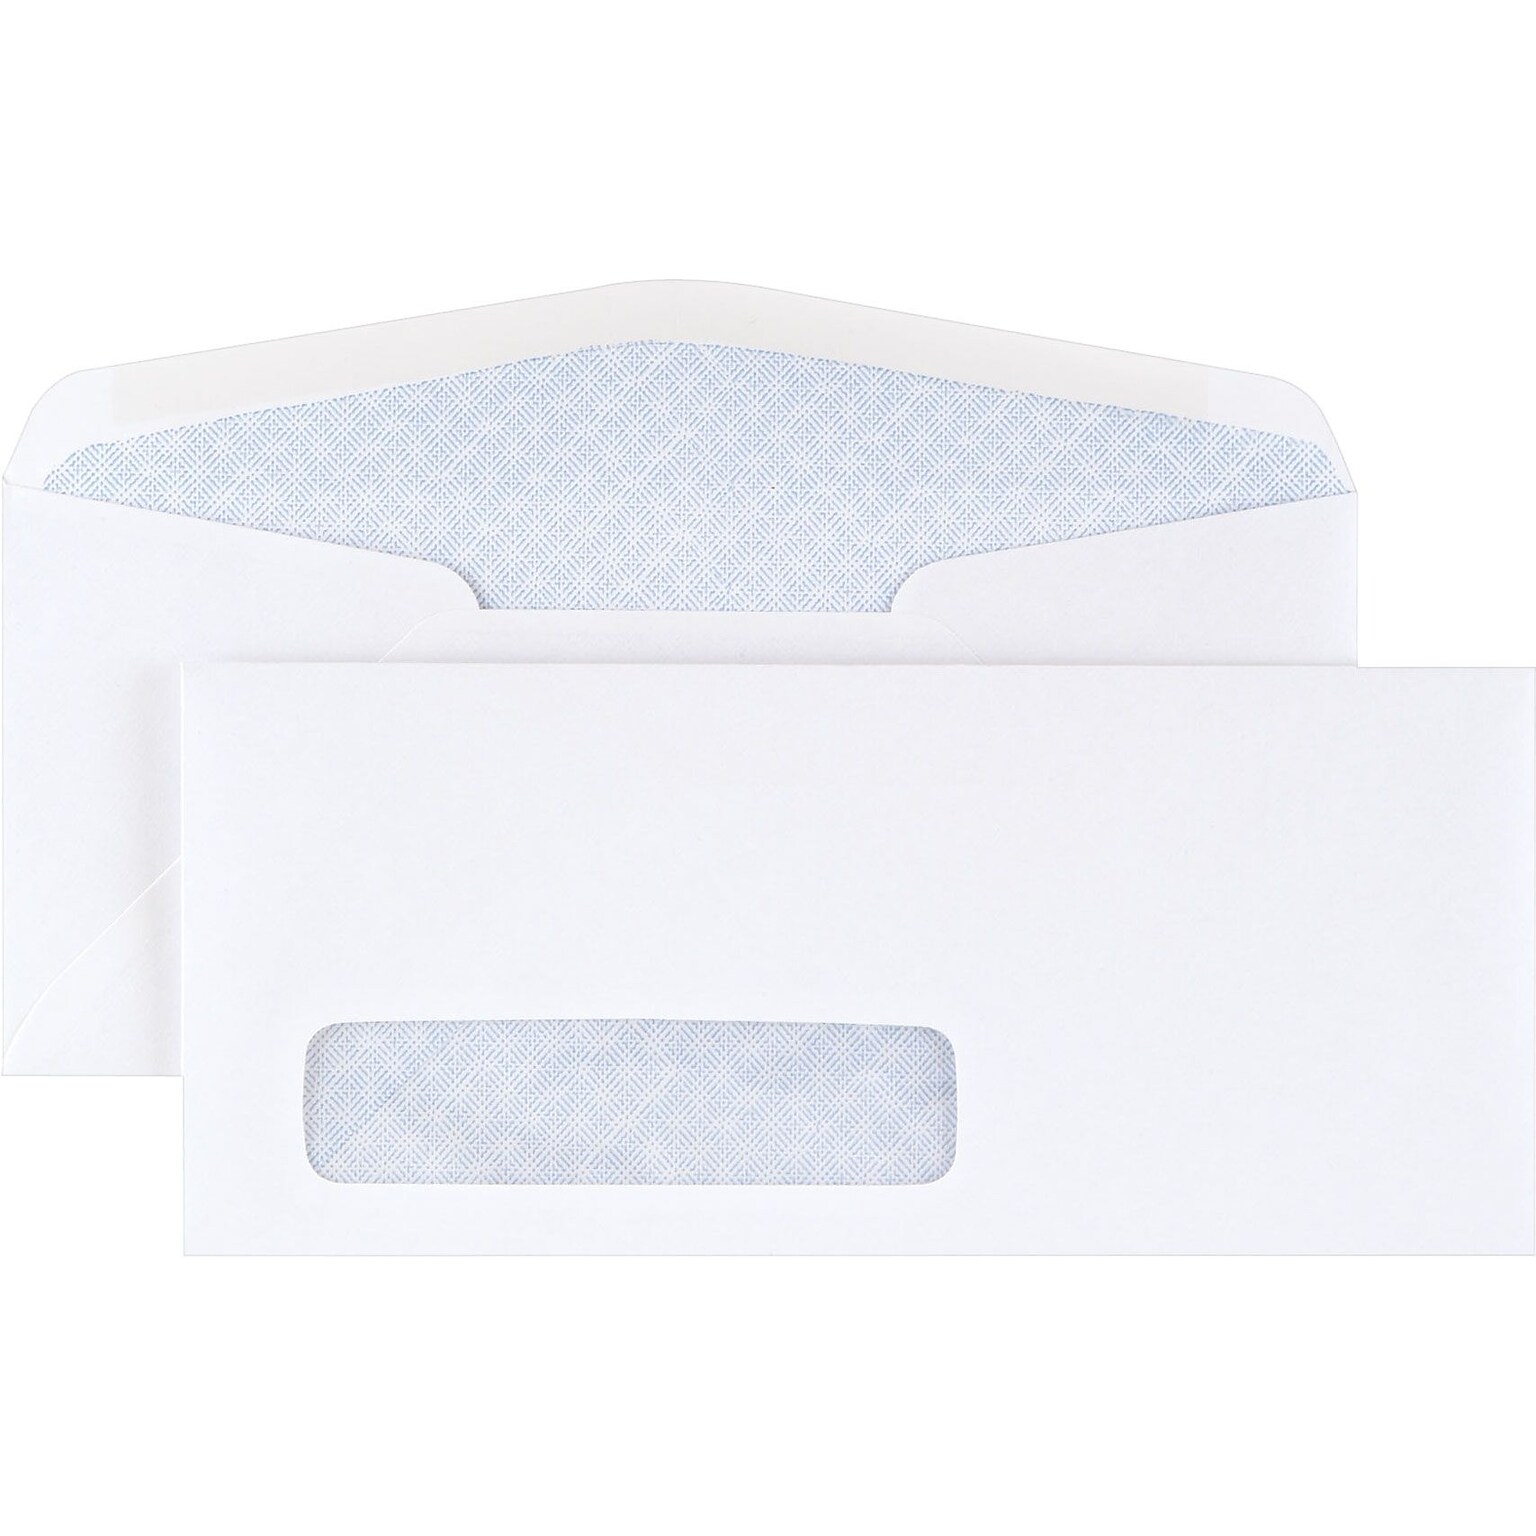 Quill Brand Gummed Security Tinted #10 Window Envelope, 4 1/8 x 9 1/2, White Wove, 500/Box (69667 / 70693)